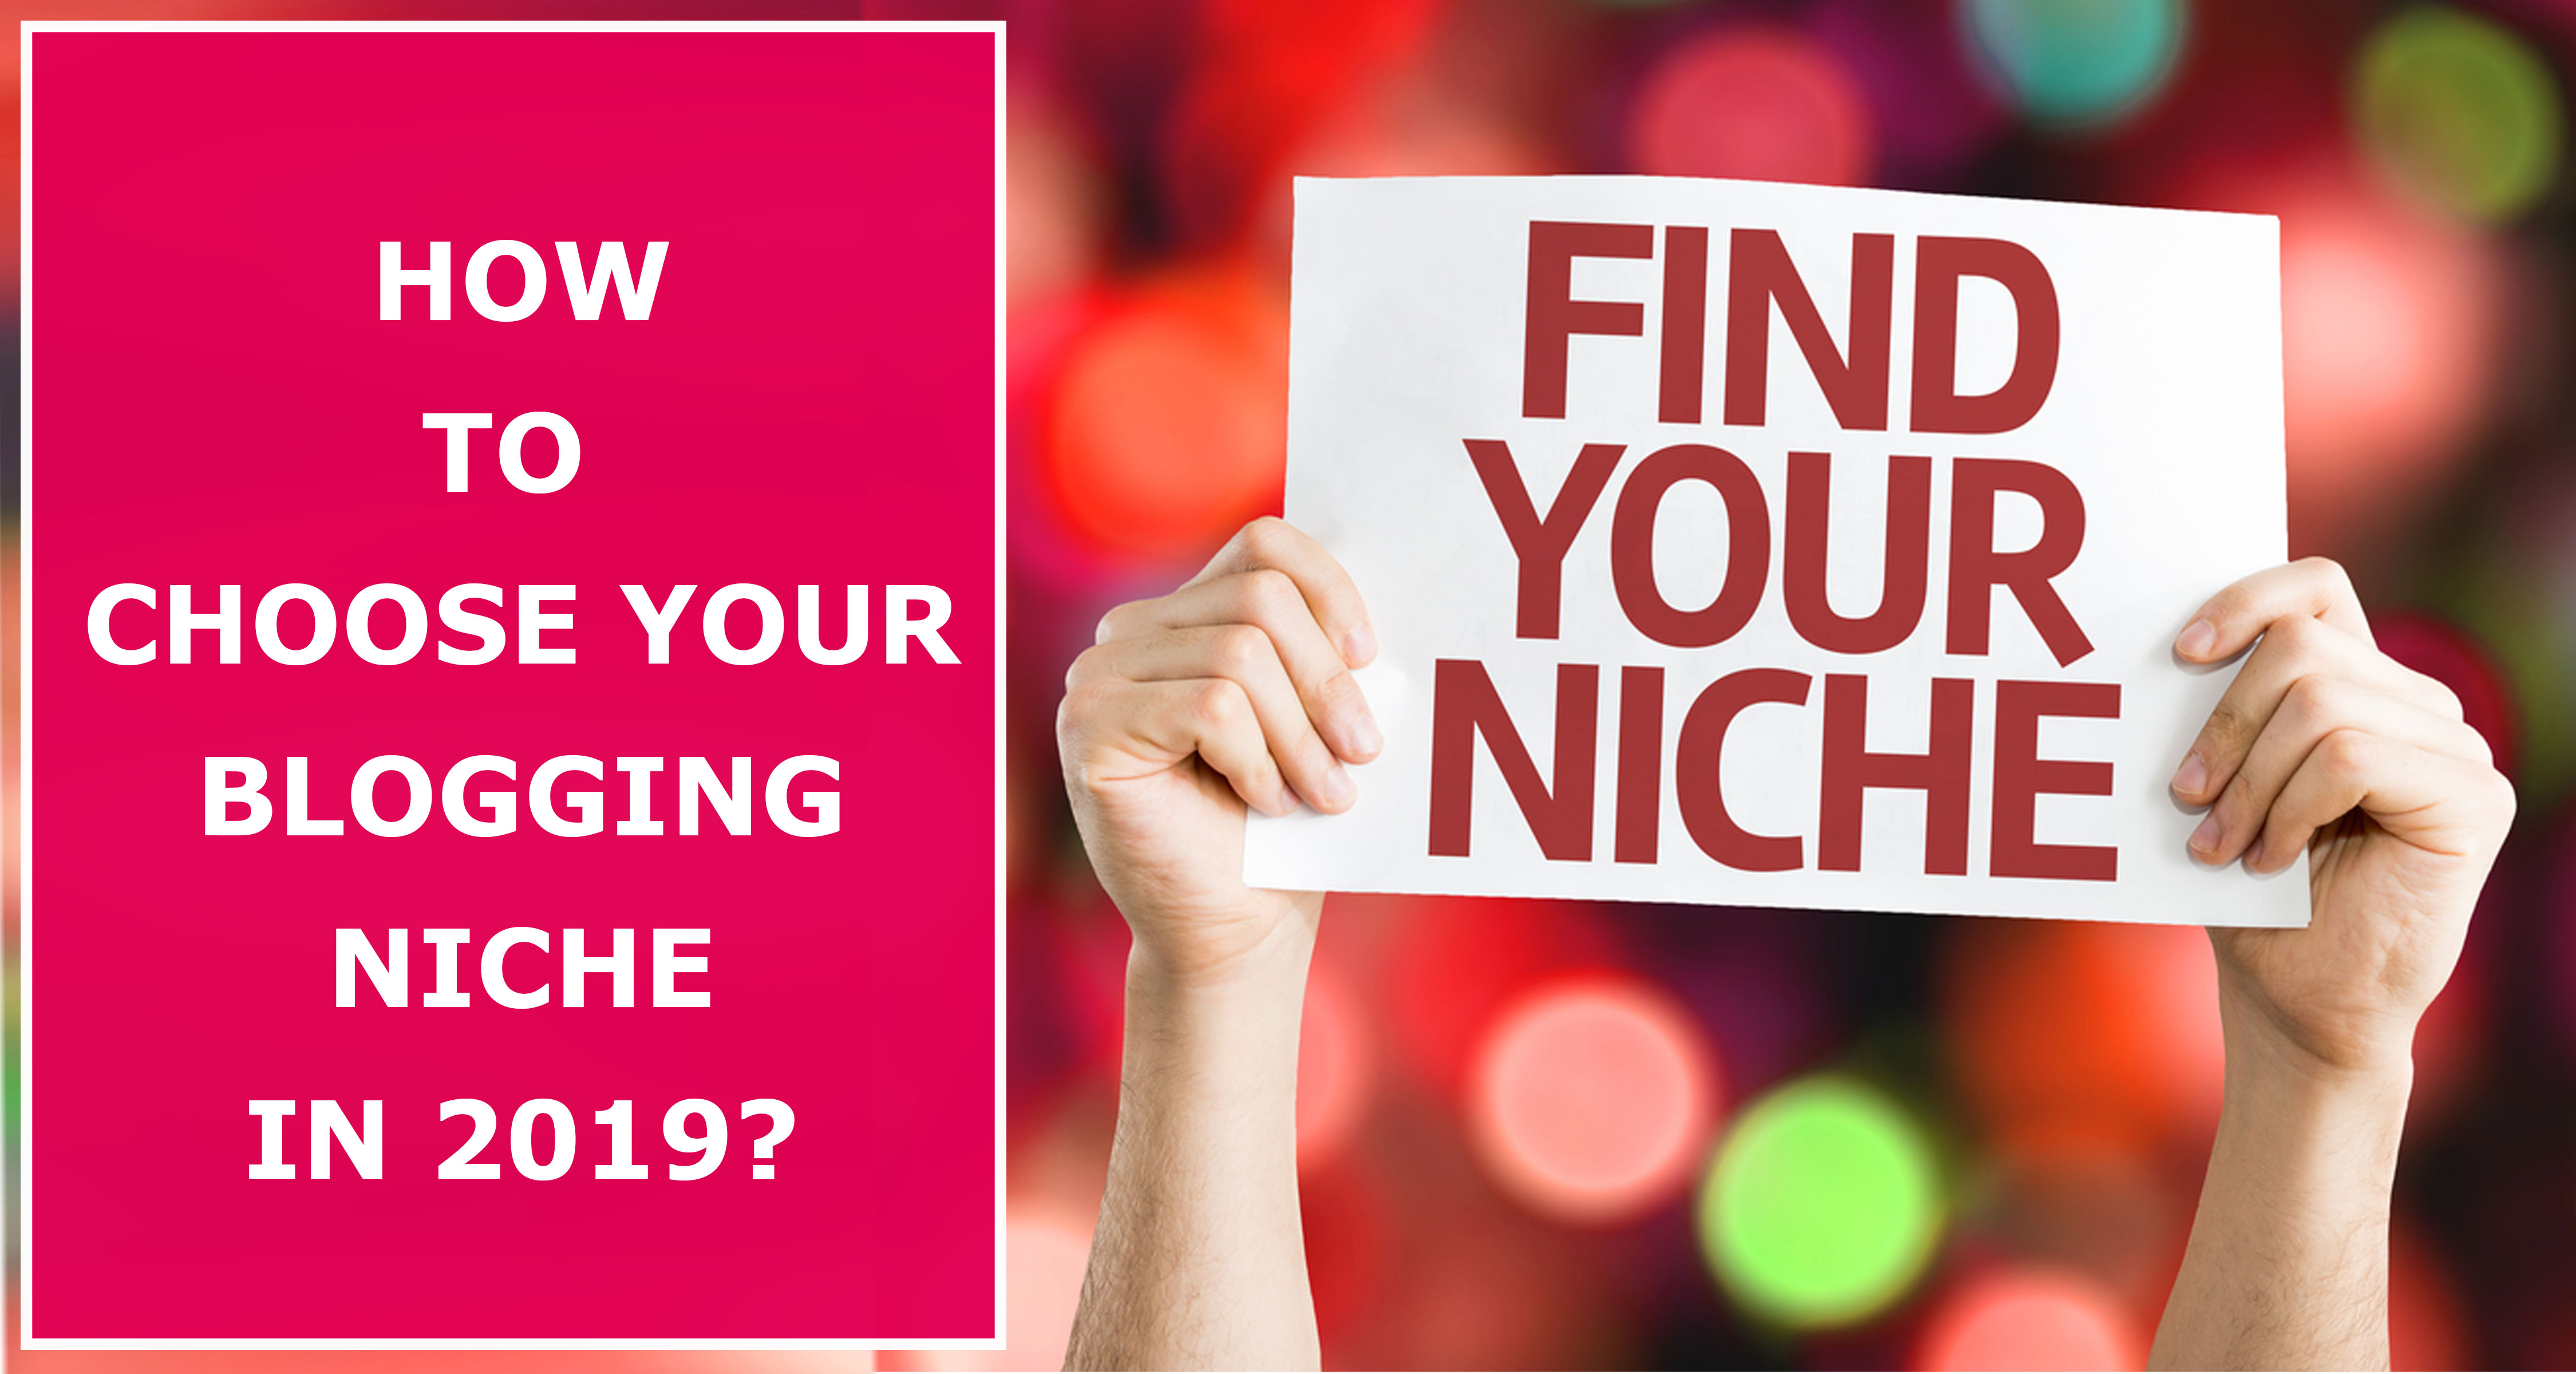 How To Choose Your Blogging Niche In 2019